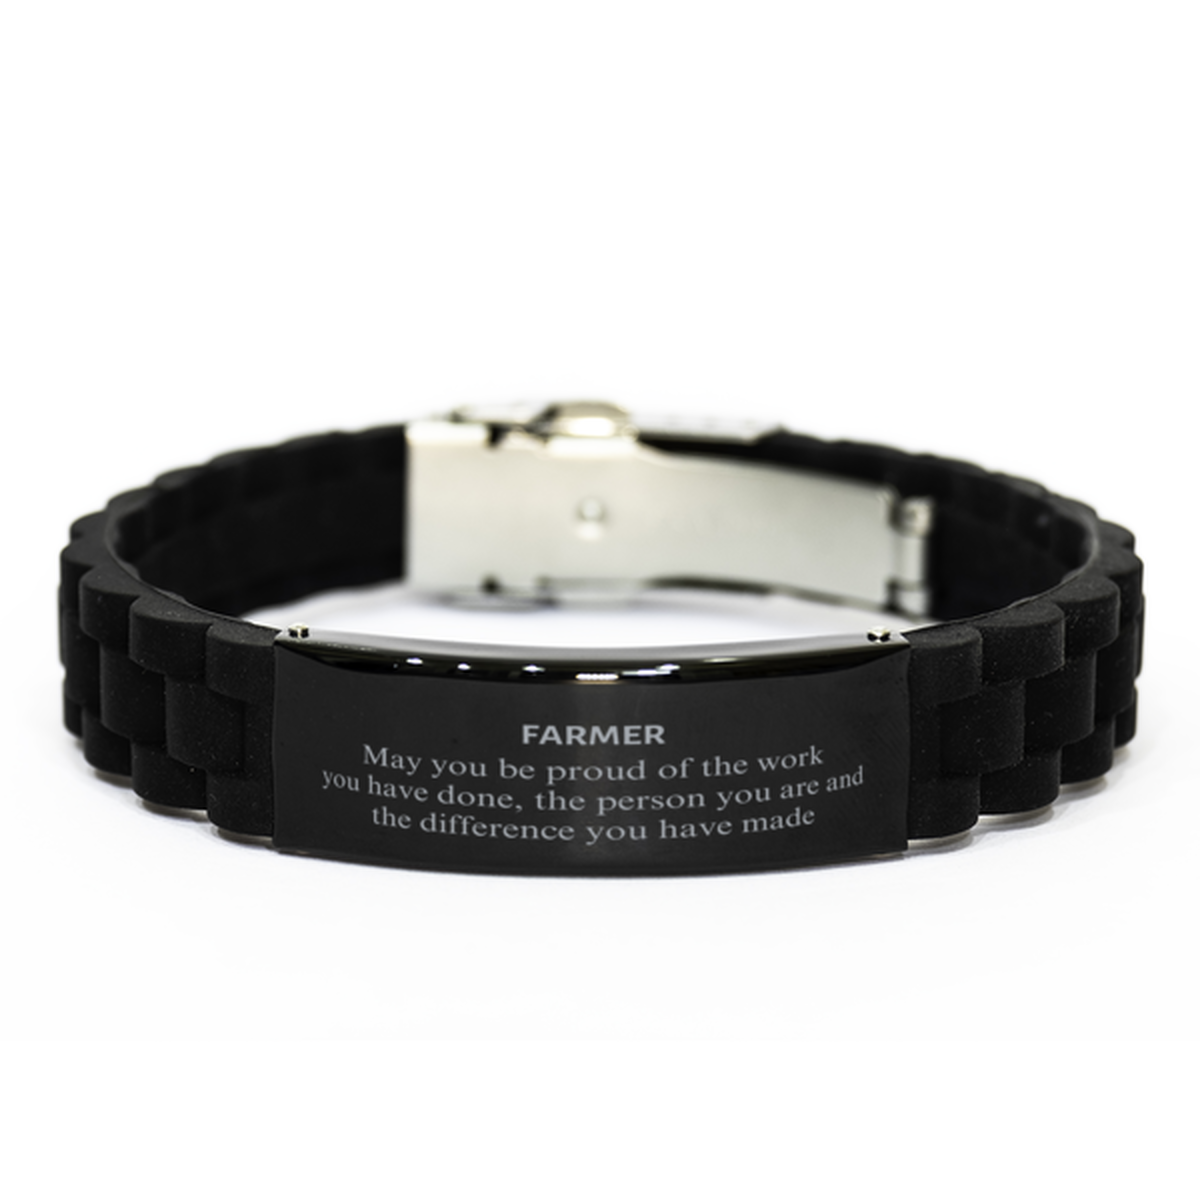 Farmer May you be proud of the work you have done, Retirement Farmer Black Glidelock Clasp Bracelet for Colleague Appreciation Gifts Amazing for Farmer